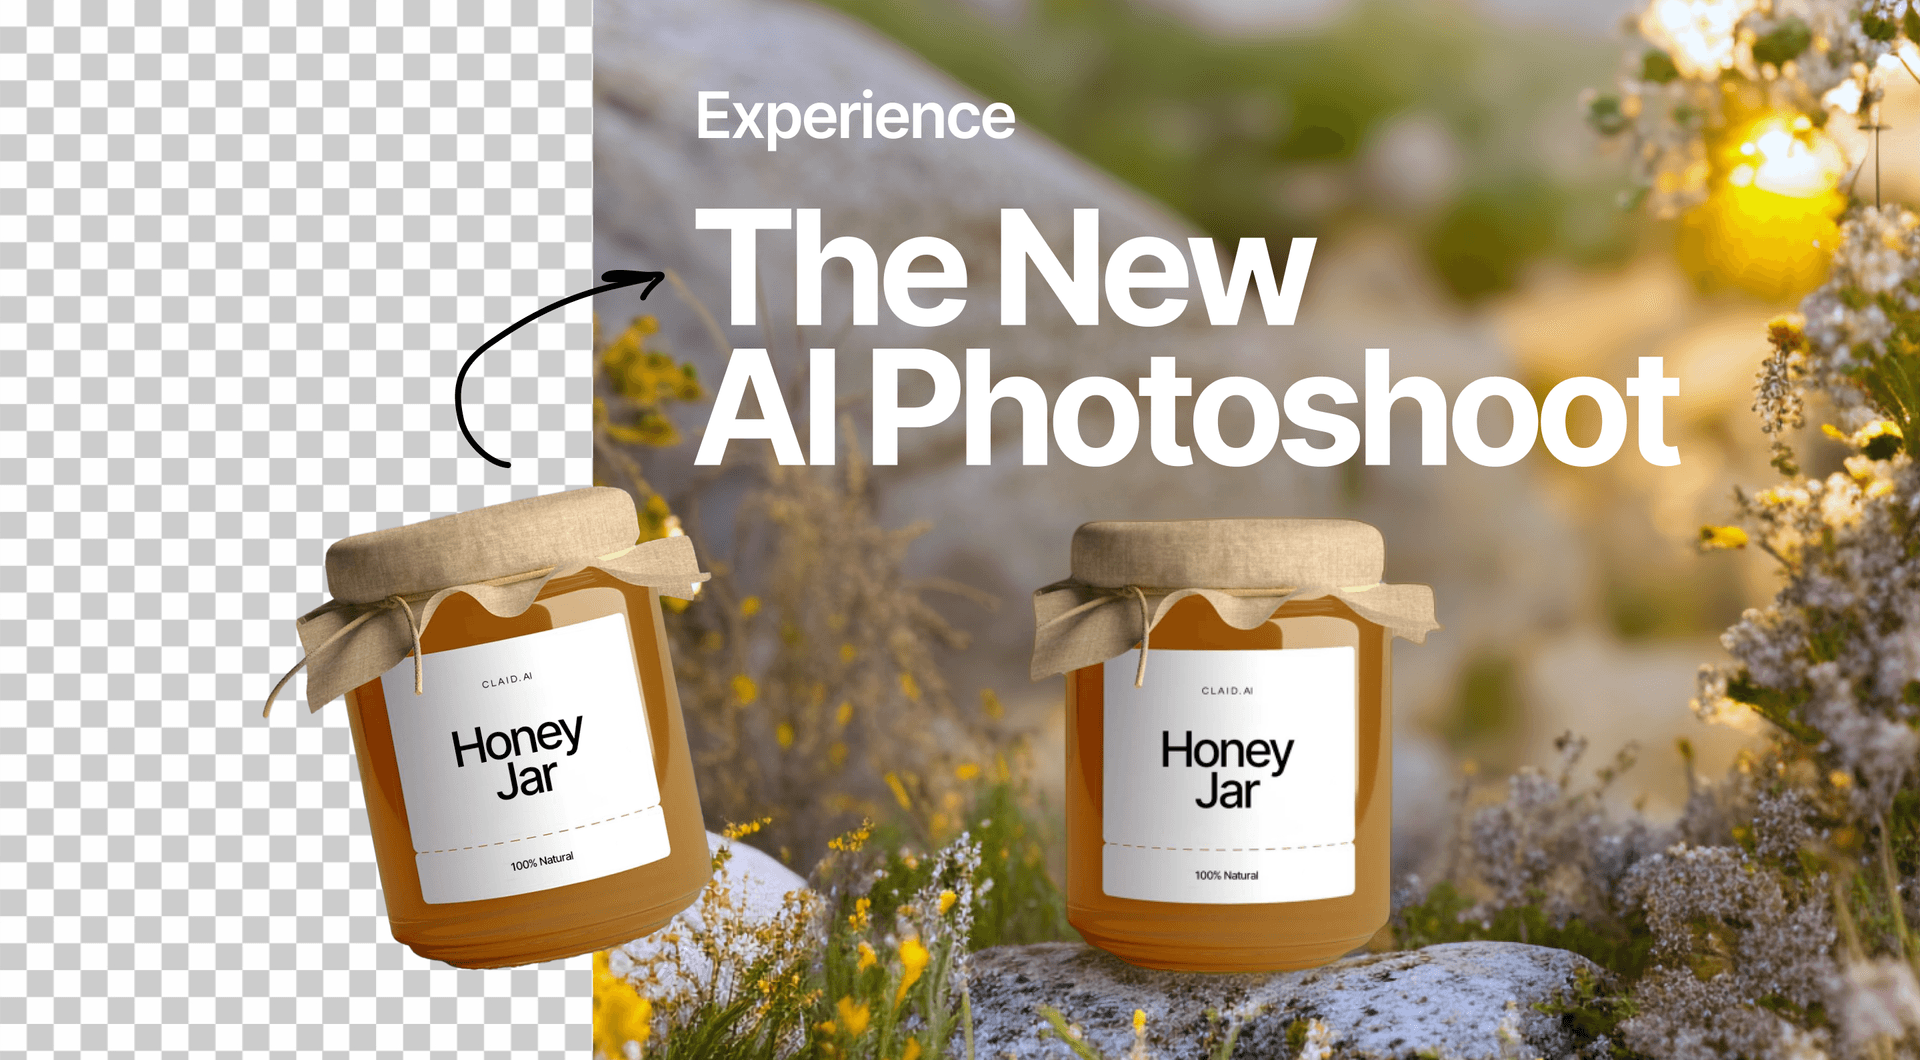 Picture for Upgrade Your Product Photos: More Detail, More Templates, More Speed in the New AI Photoshoot article